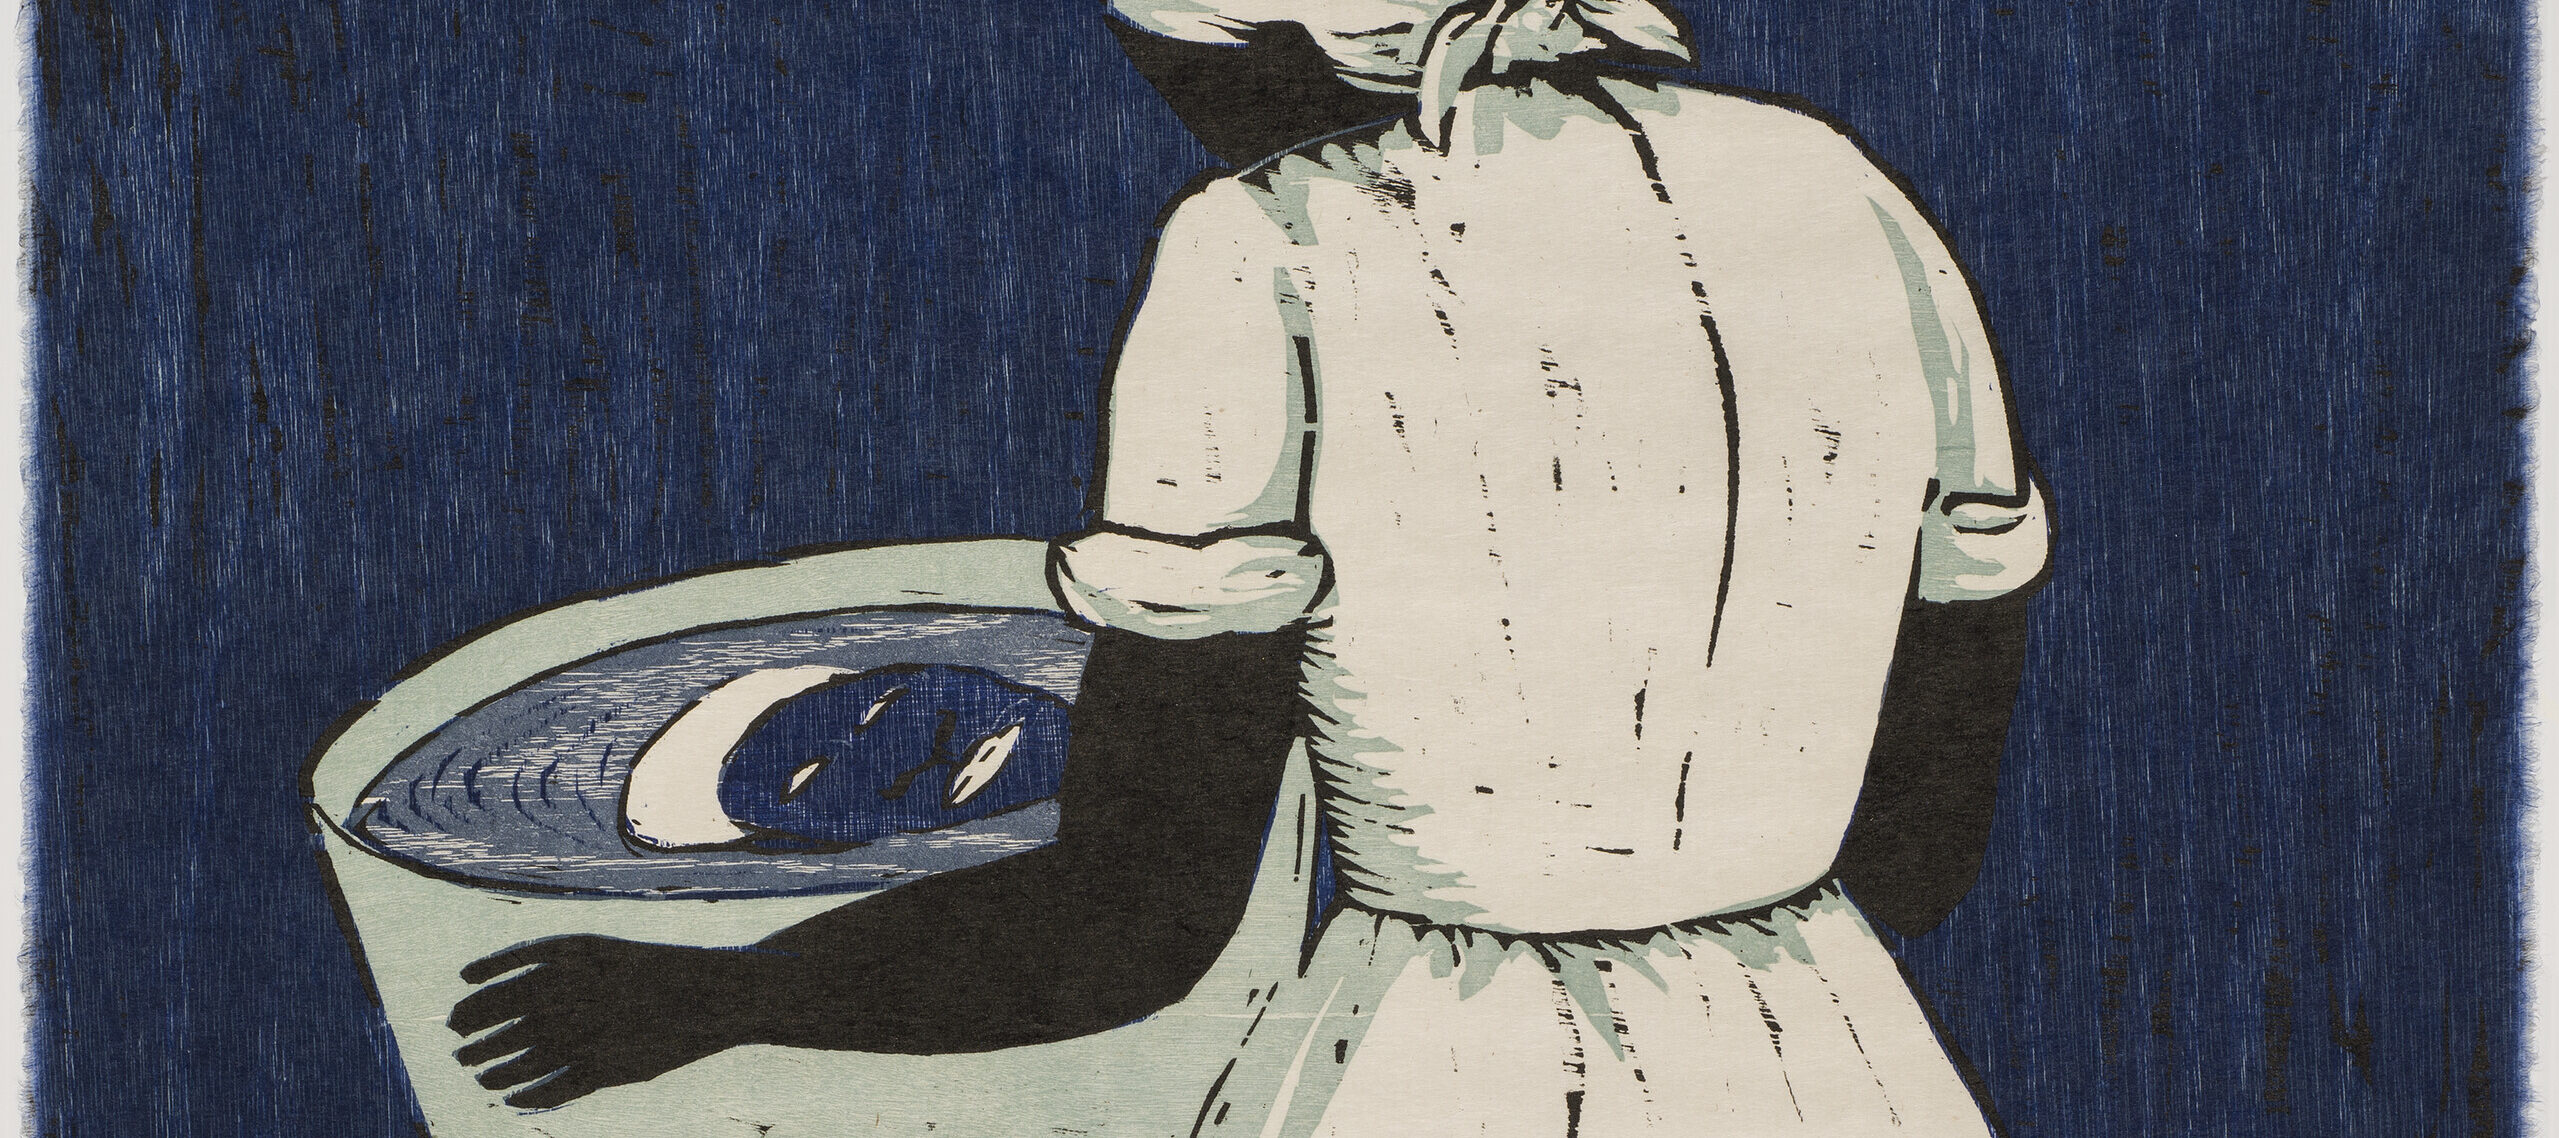 A woodcut print shows a barefoot Black woman from the back at a slight angle holding a washtub. Her face is visible only via the reflection in the tub water.